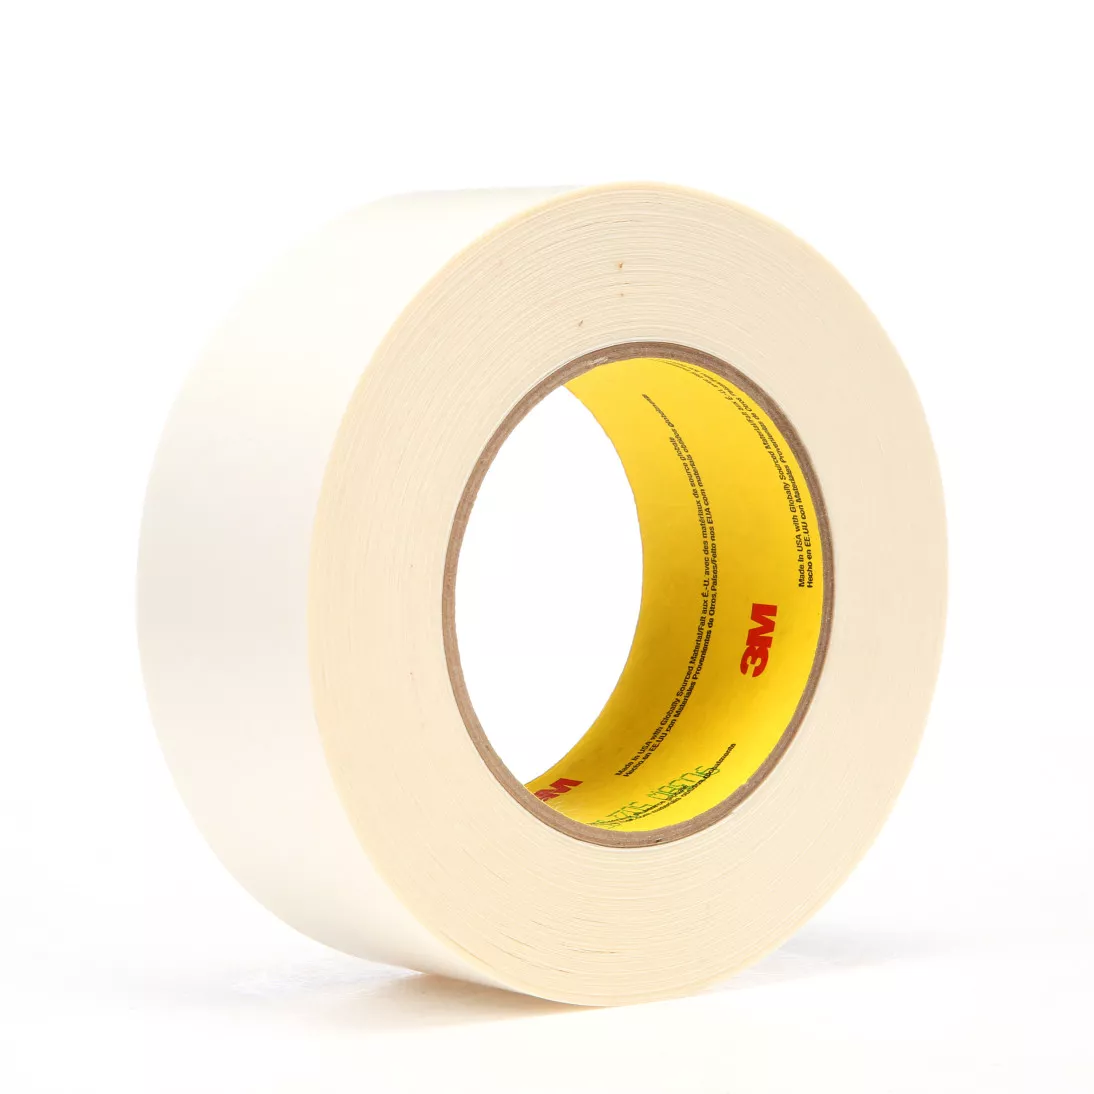 3M™ Repulpable Double Coated Splicing Tape 9038W, White, 36 mm x 33 m, 3
mil, 24 rolls per case